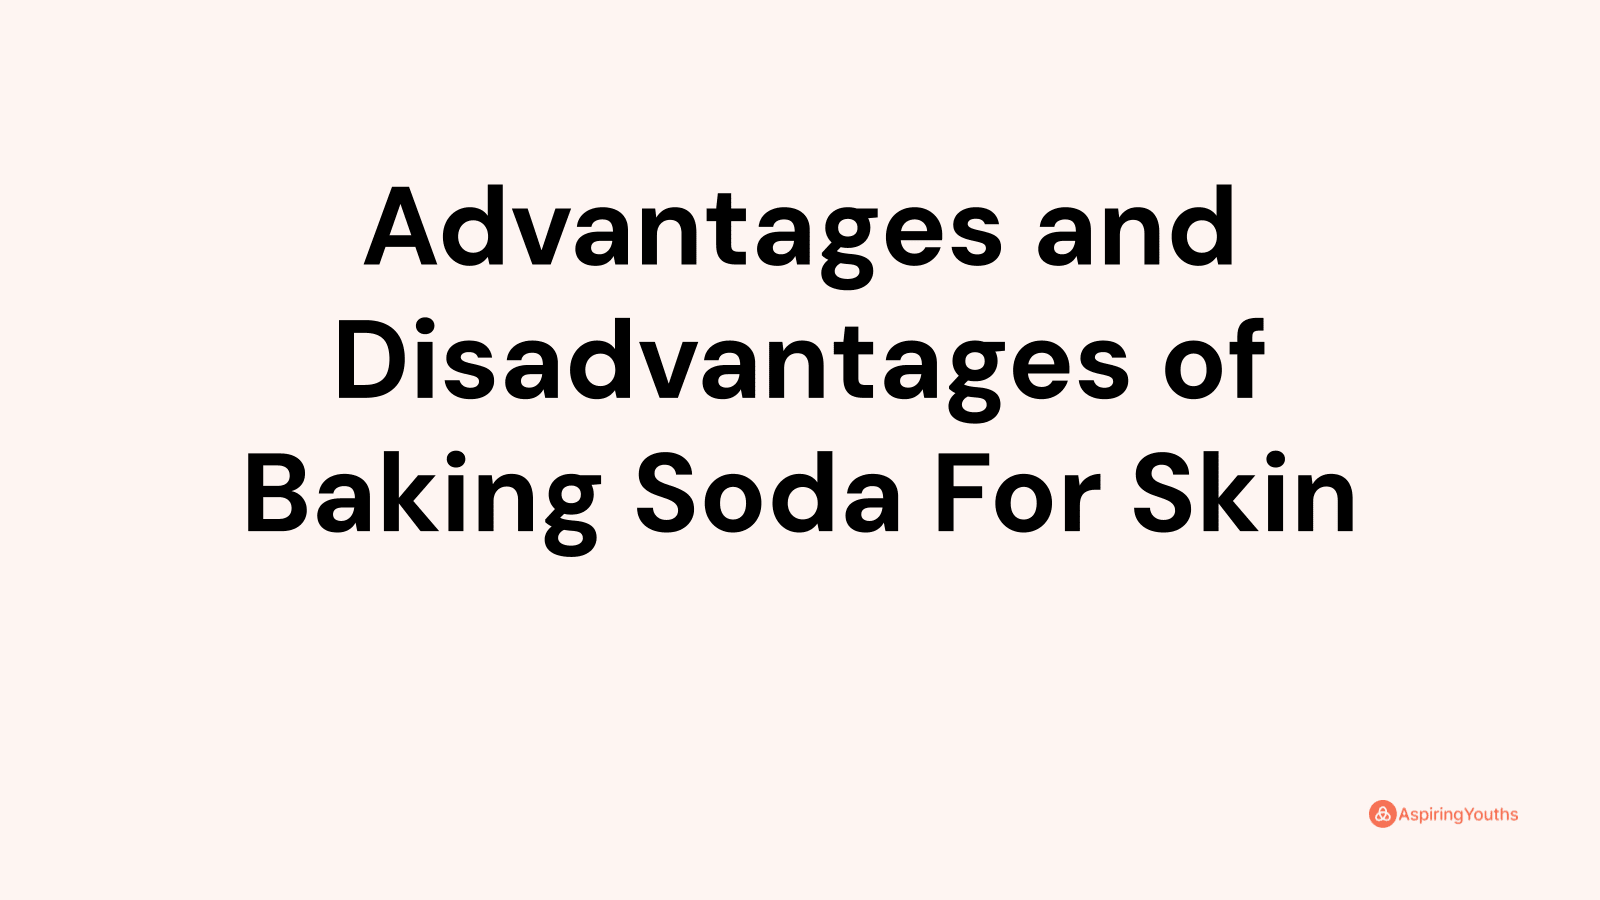 Advantages and disadvantages of Baking Soda For Skin